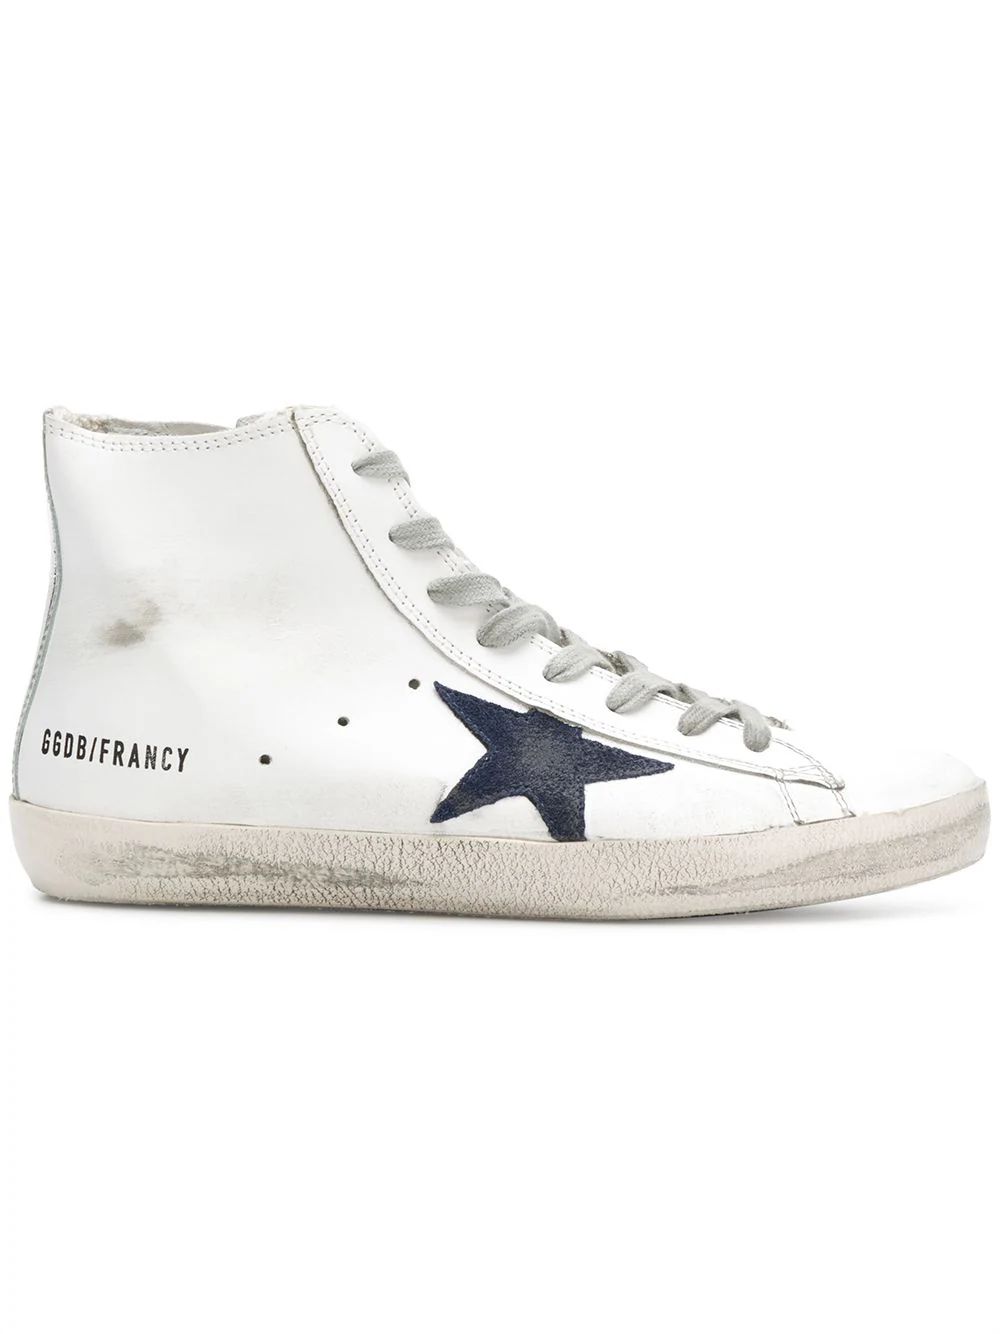 Golden Goose Deluxe Brand distressed Francy high-top sneakers - White | FarFetch US